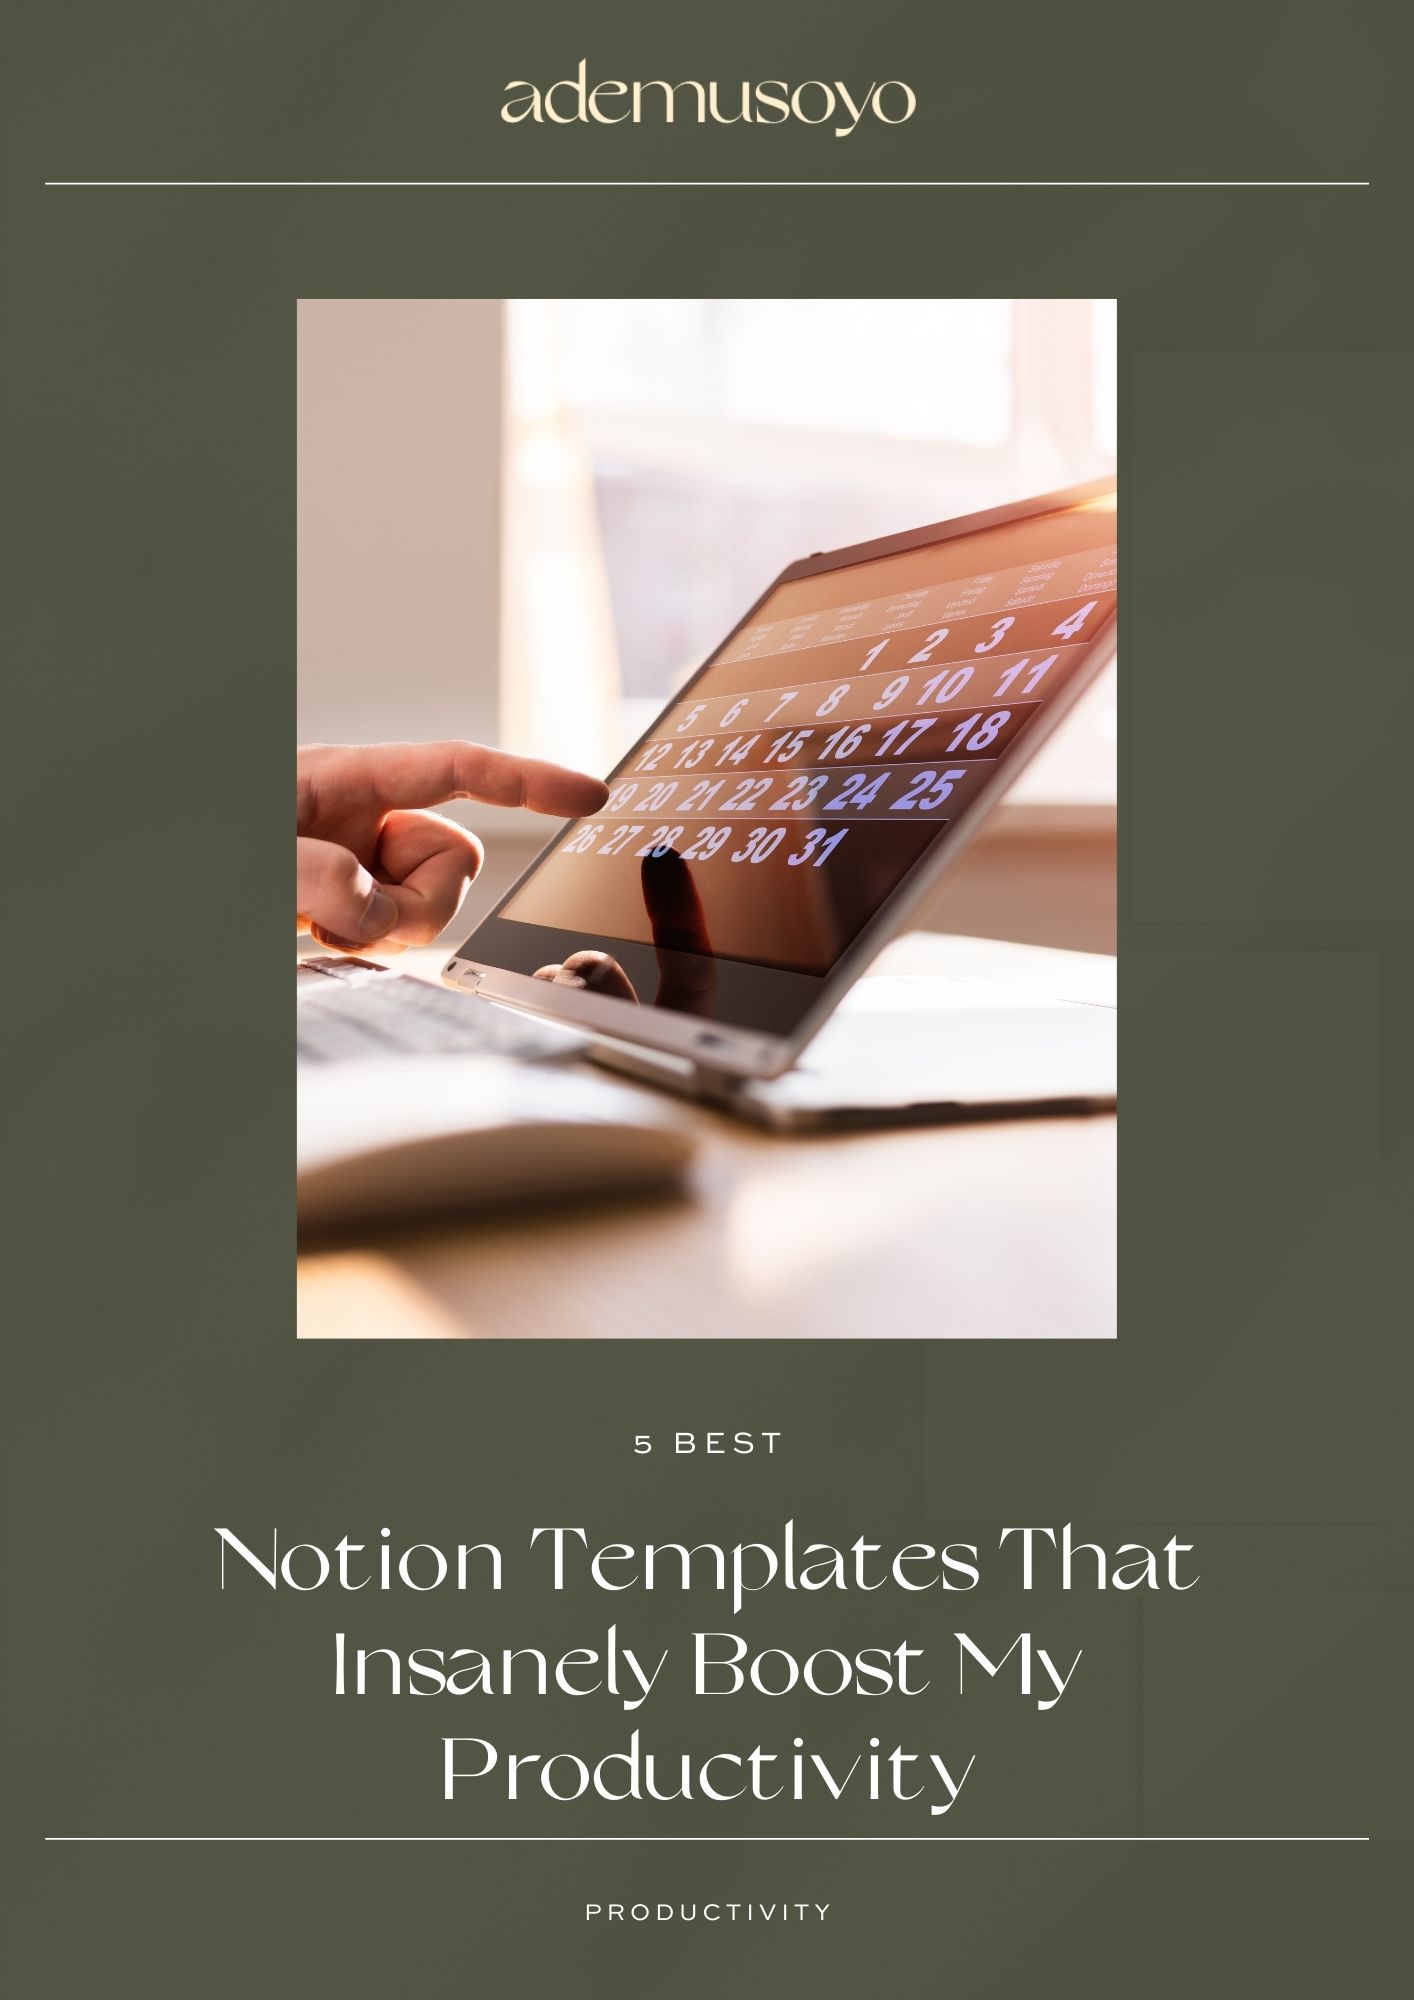 5 Best Notion Templates That Insanely Boost My Productivity